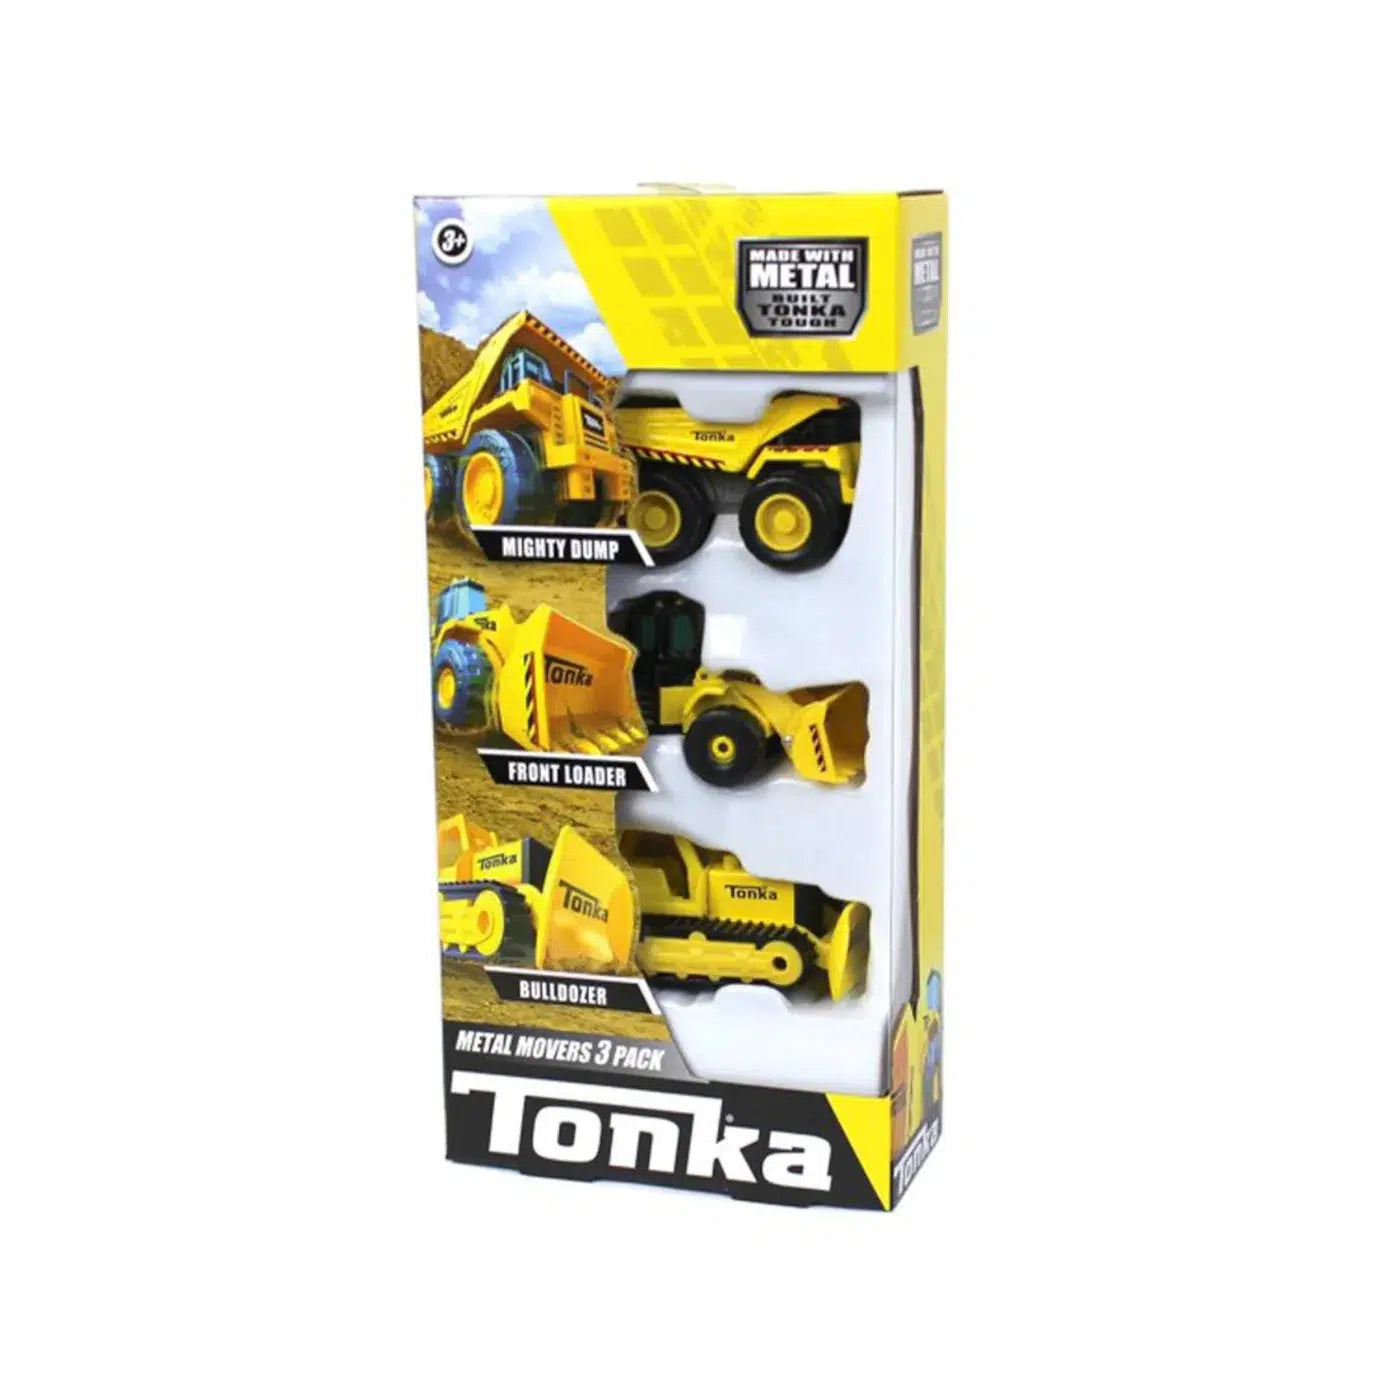 Front view of the Tonka Metal Movers 3 pack.